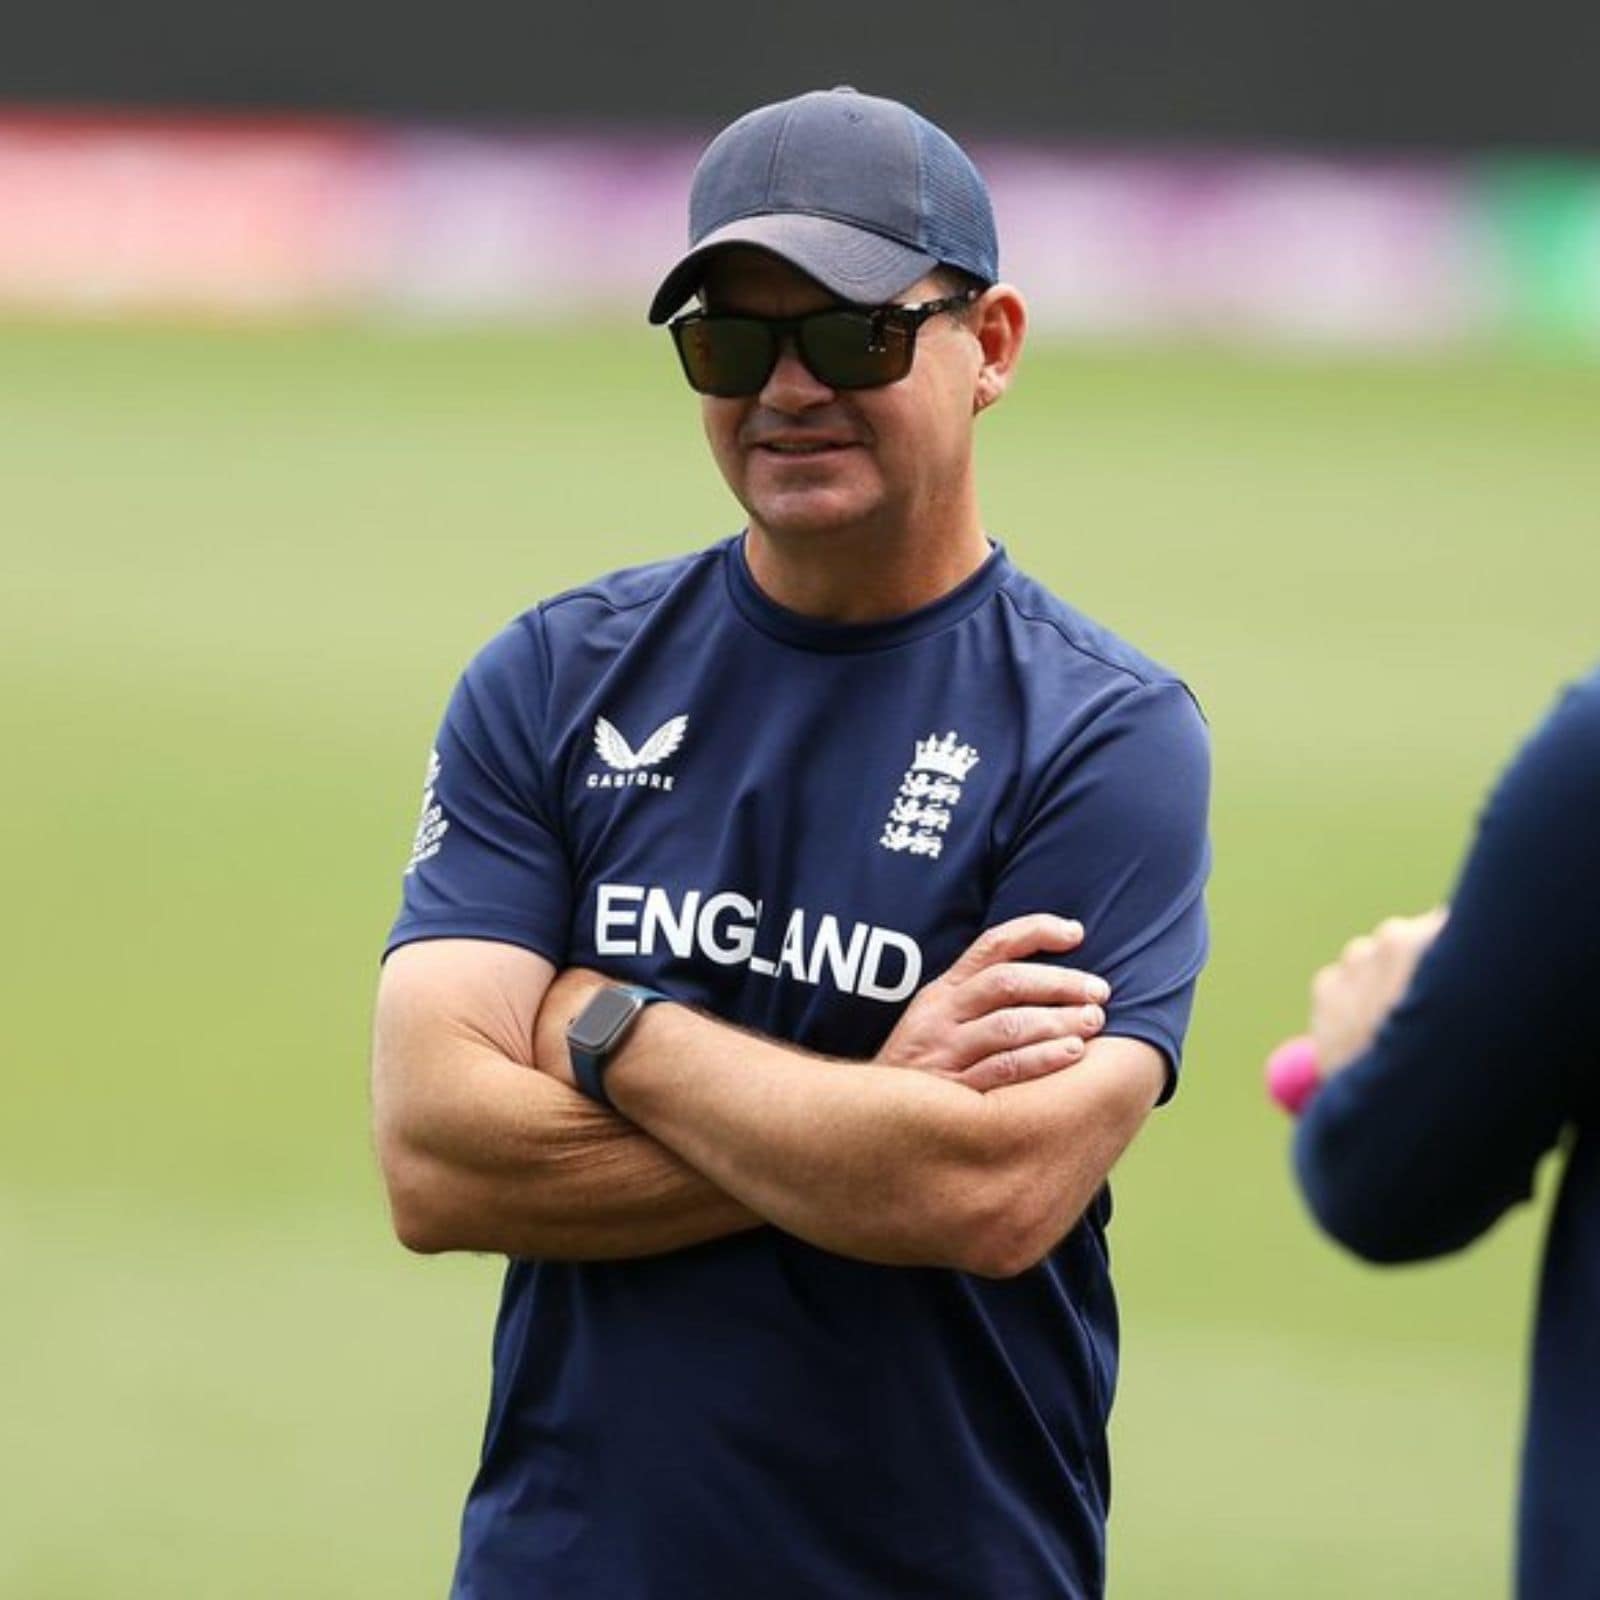 It's over': England coach Mott throws in towel on World Cup hopes